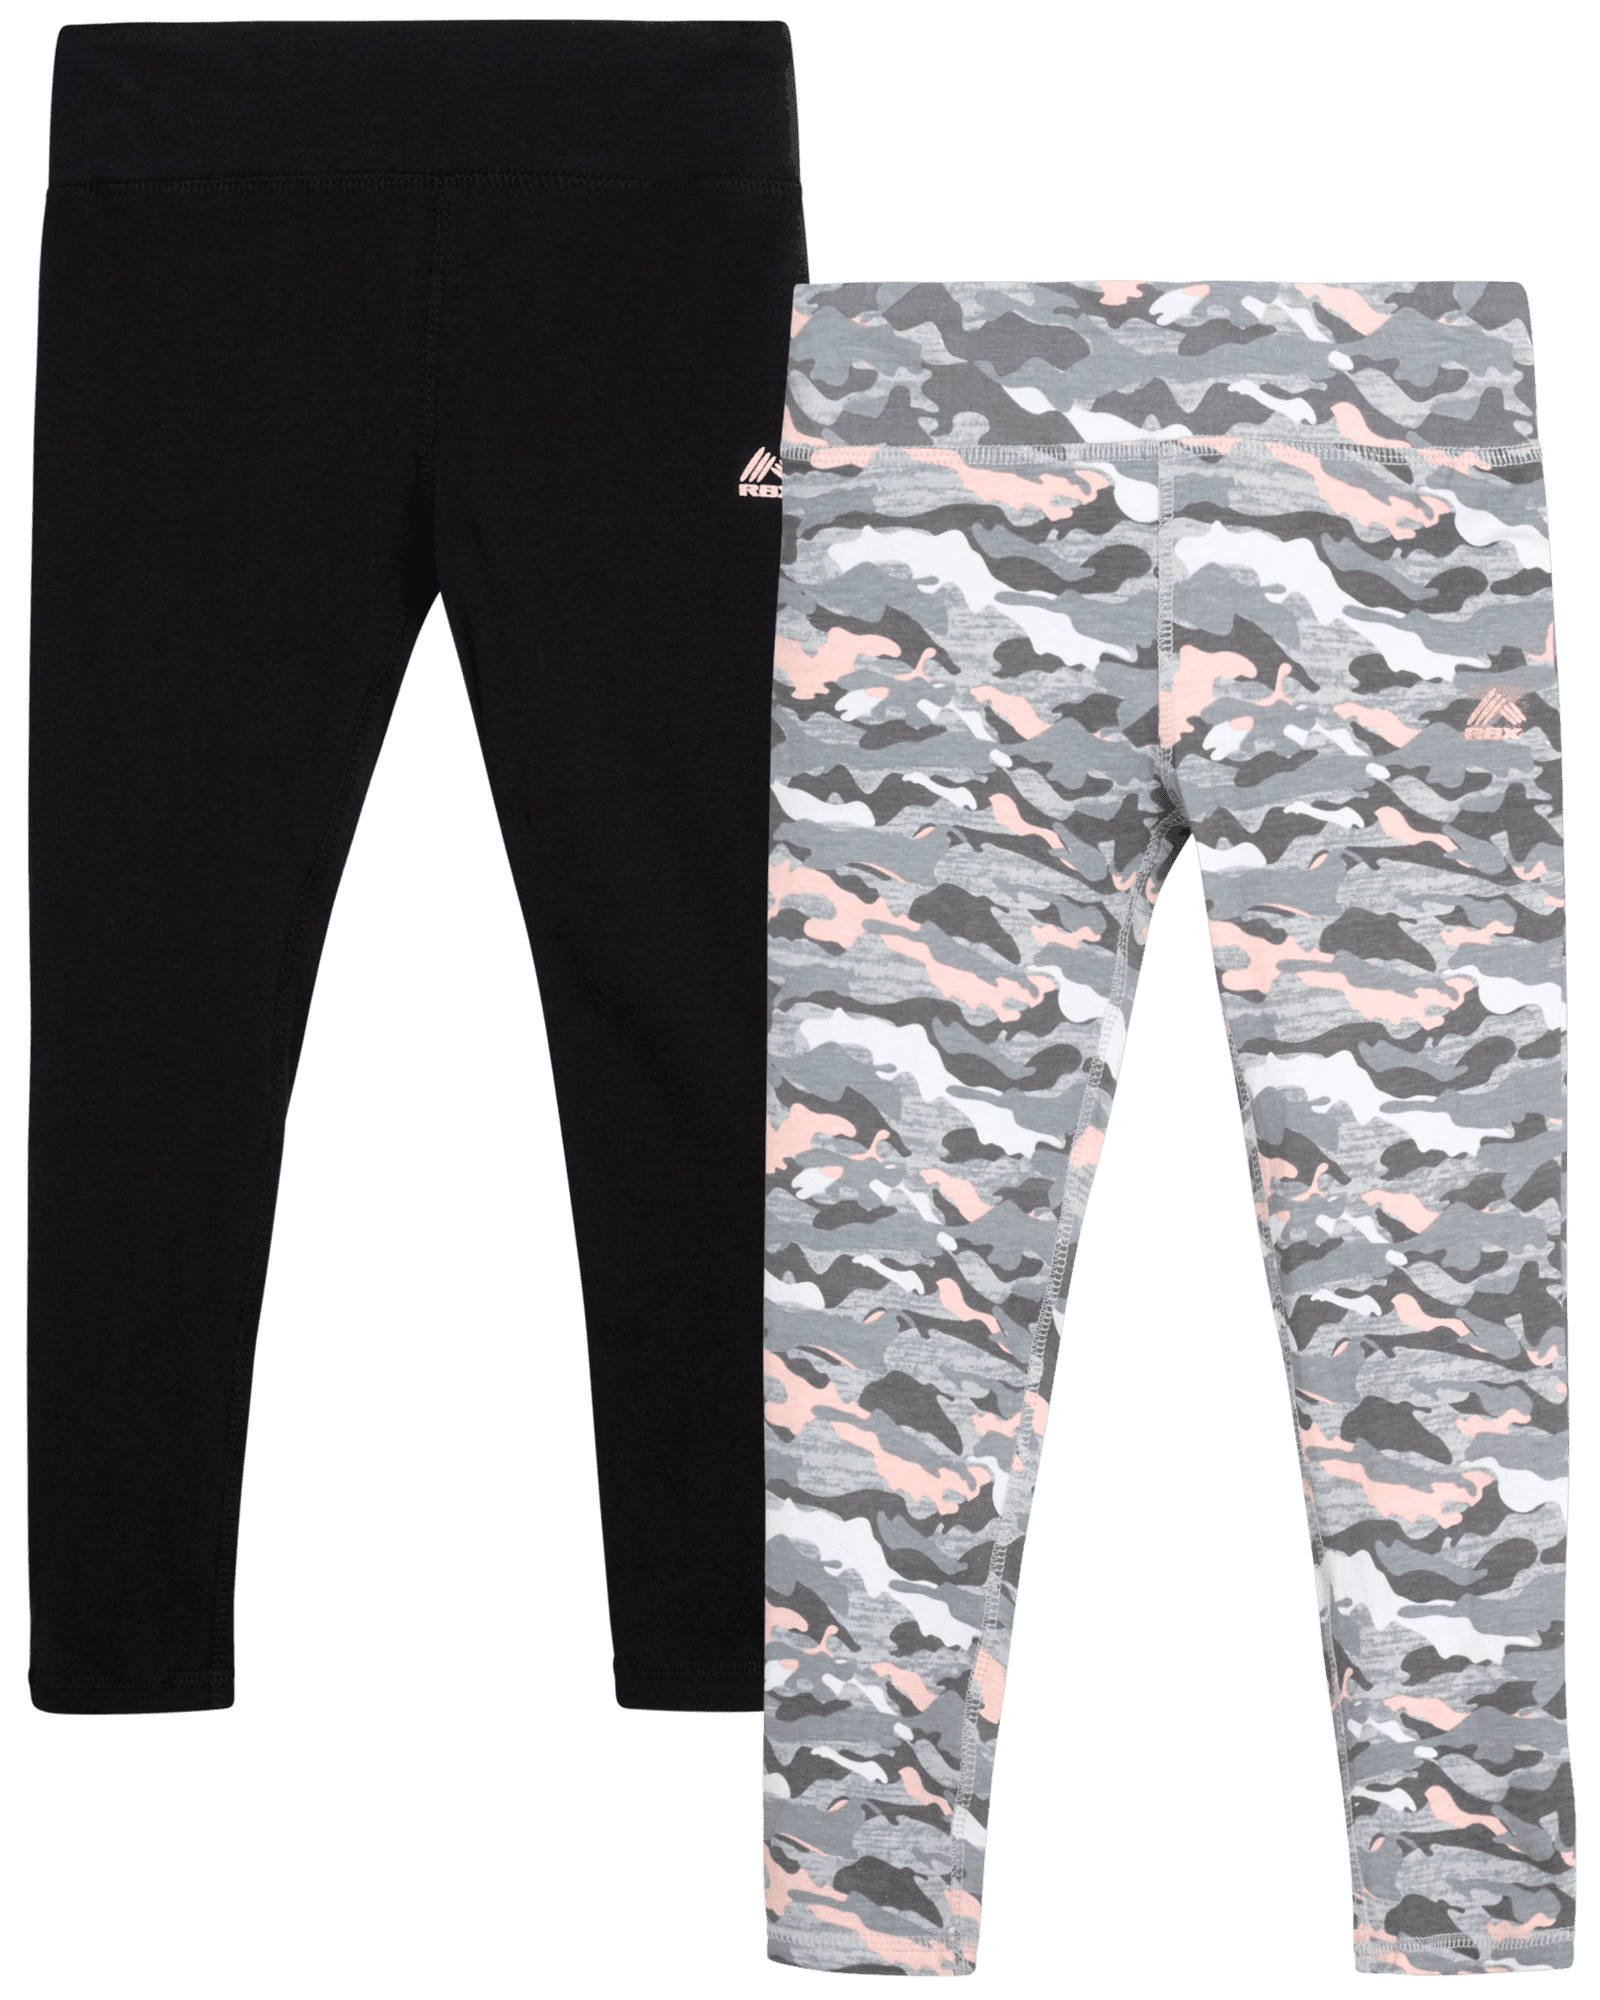 RBX Girls' Active Leggings - 2 Pack Performance Stretch Cotton Yoga Pants ( Size: 4-16) White Multi 7-8